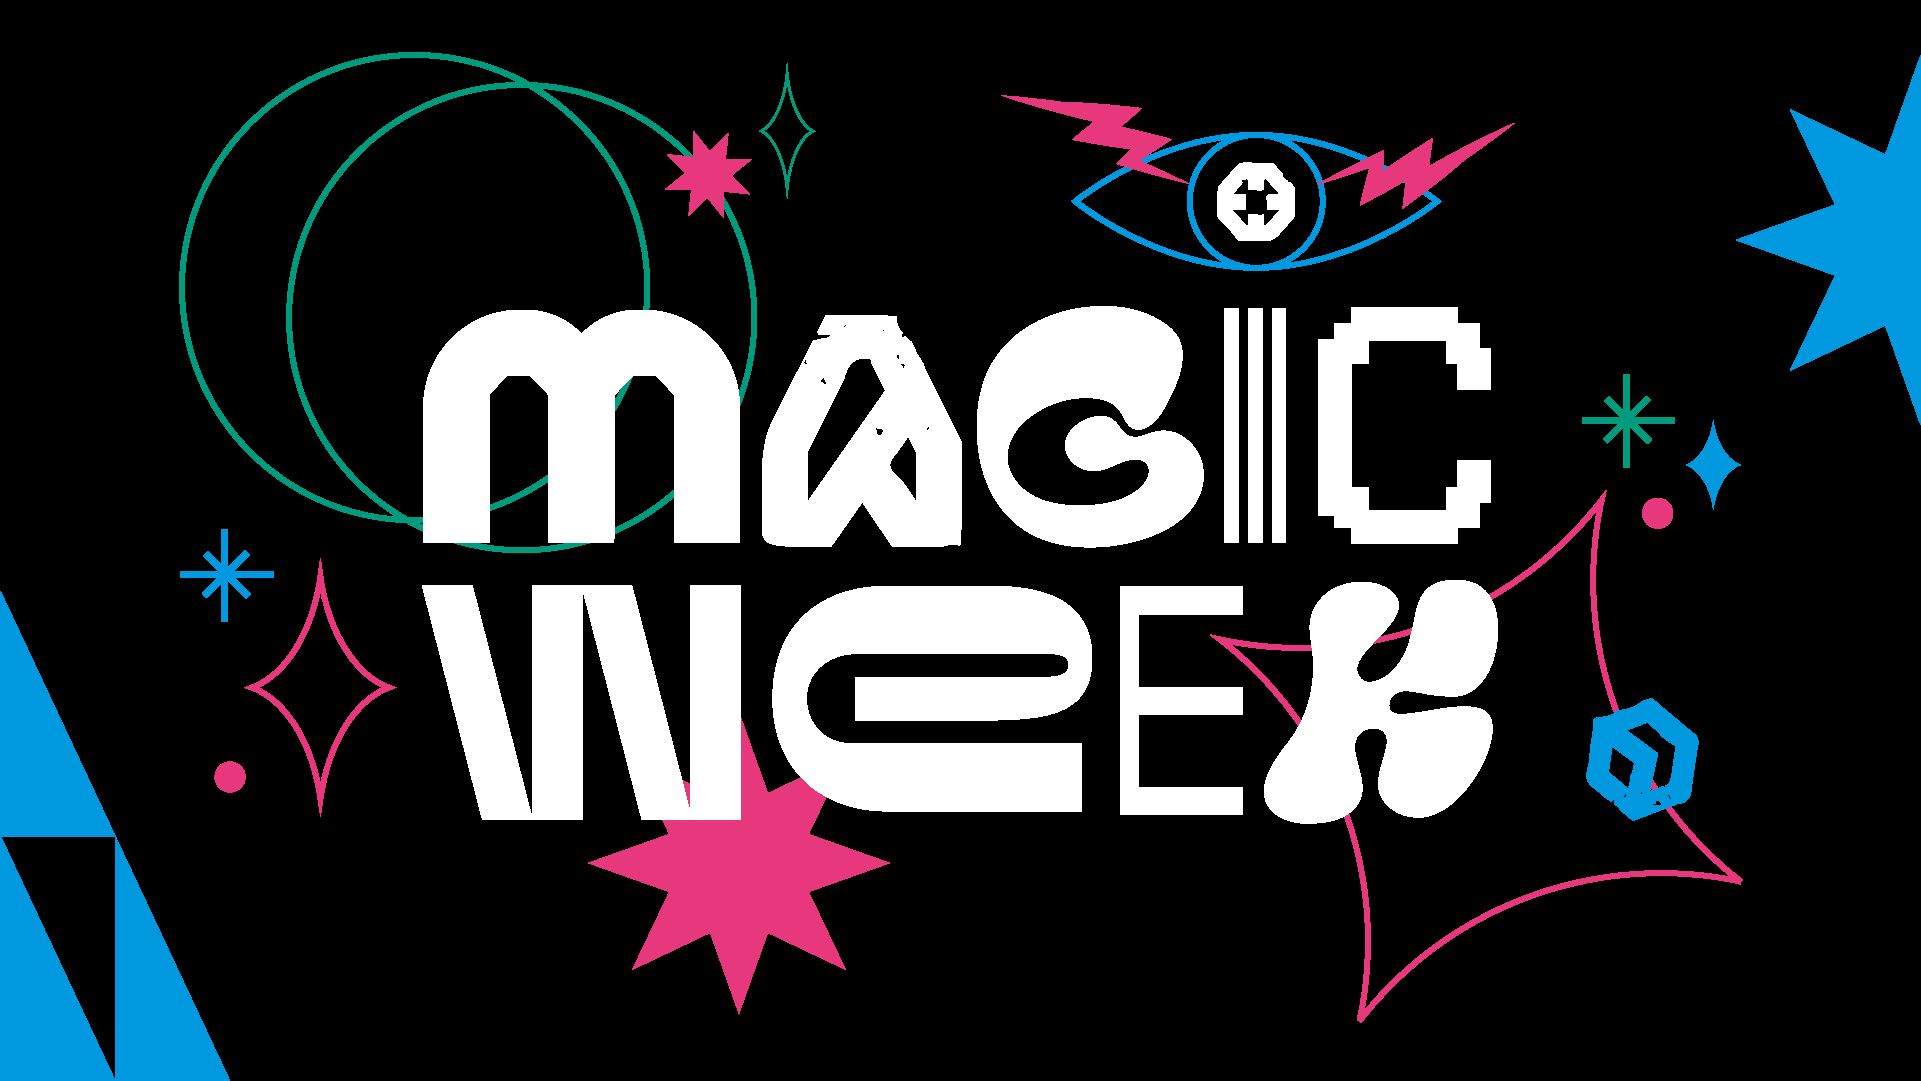 The words Magic Week, in letters of different graphic styles including bubble writing and pixel art, against a black background on which there are different coloured star shapes, and an eye shooting lightning